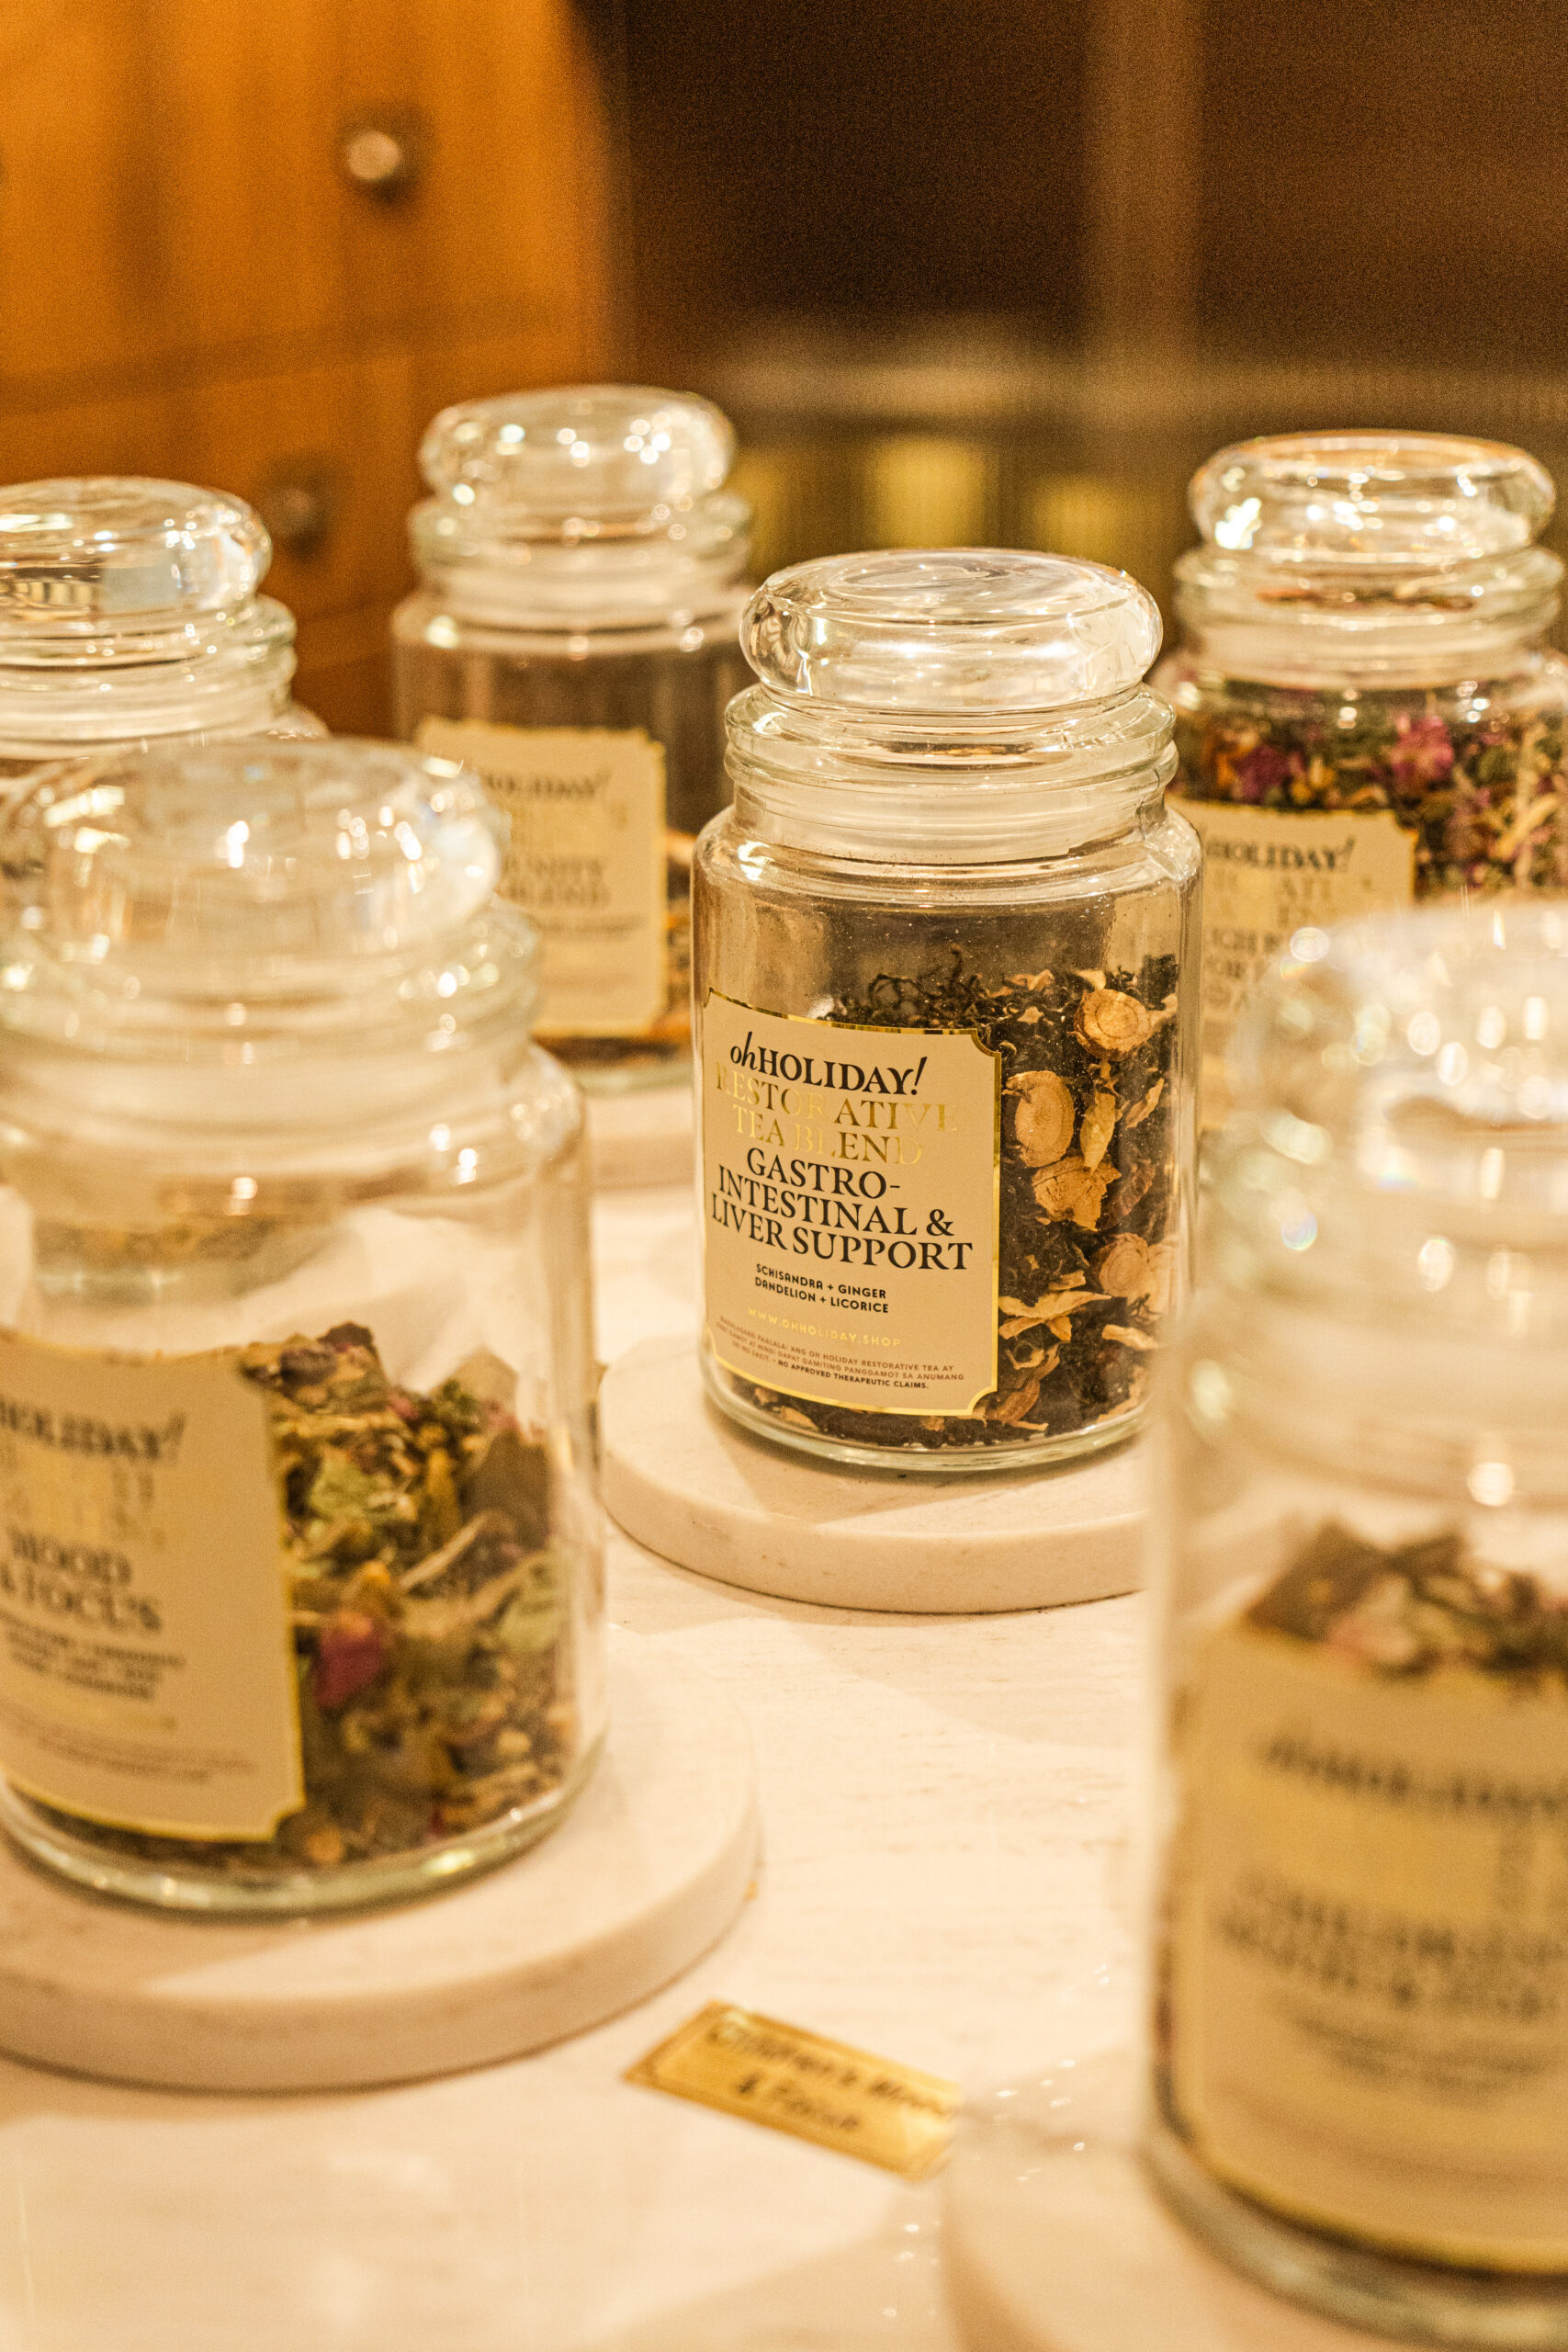 Various blends of herbs populate the shelves of Rodrigo’s apothecary ‘Oh Holiday!’